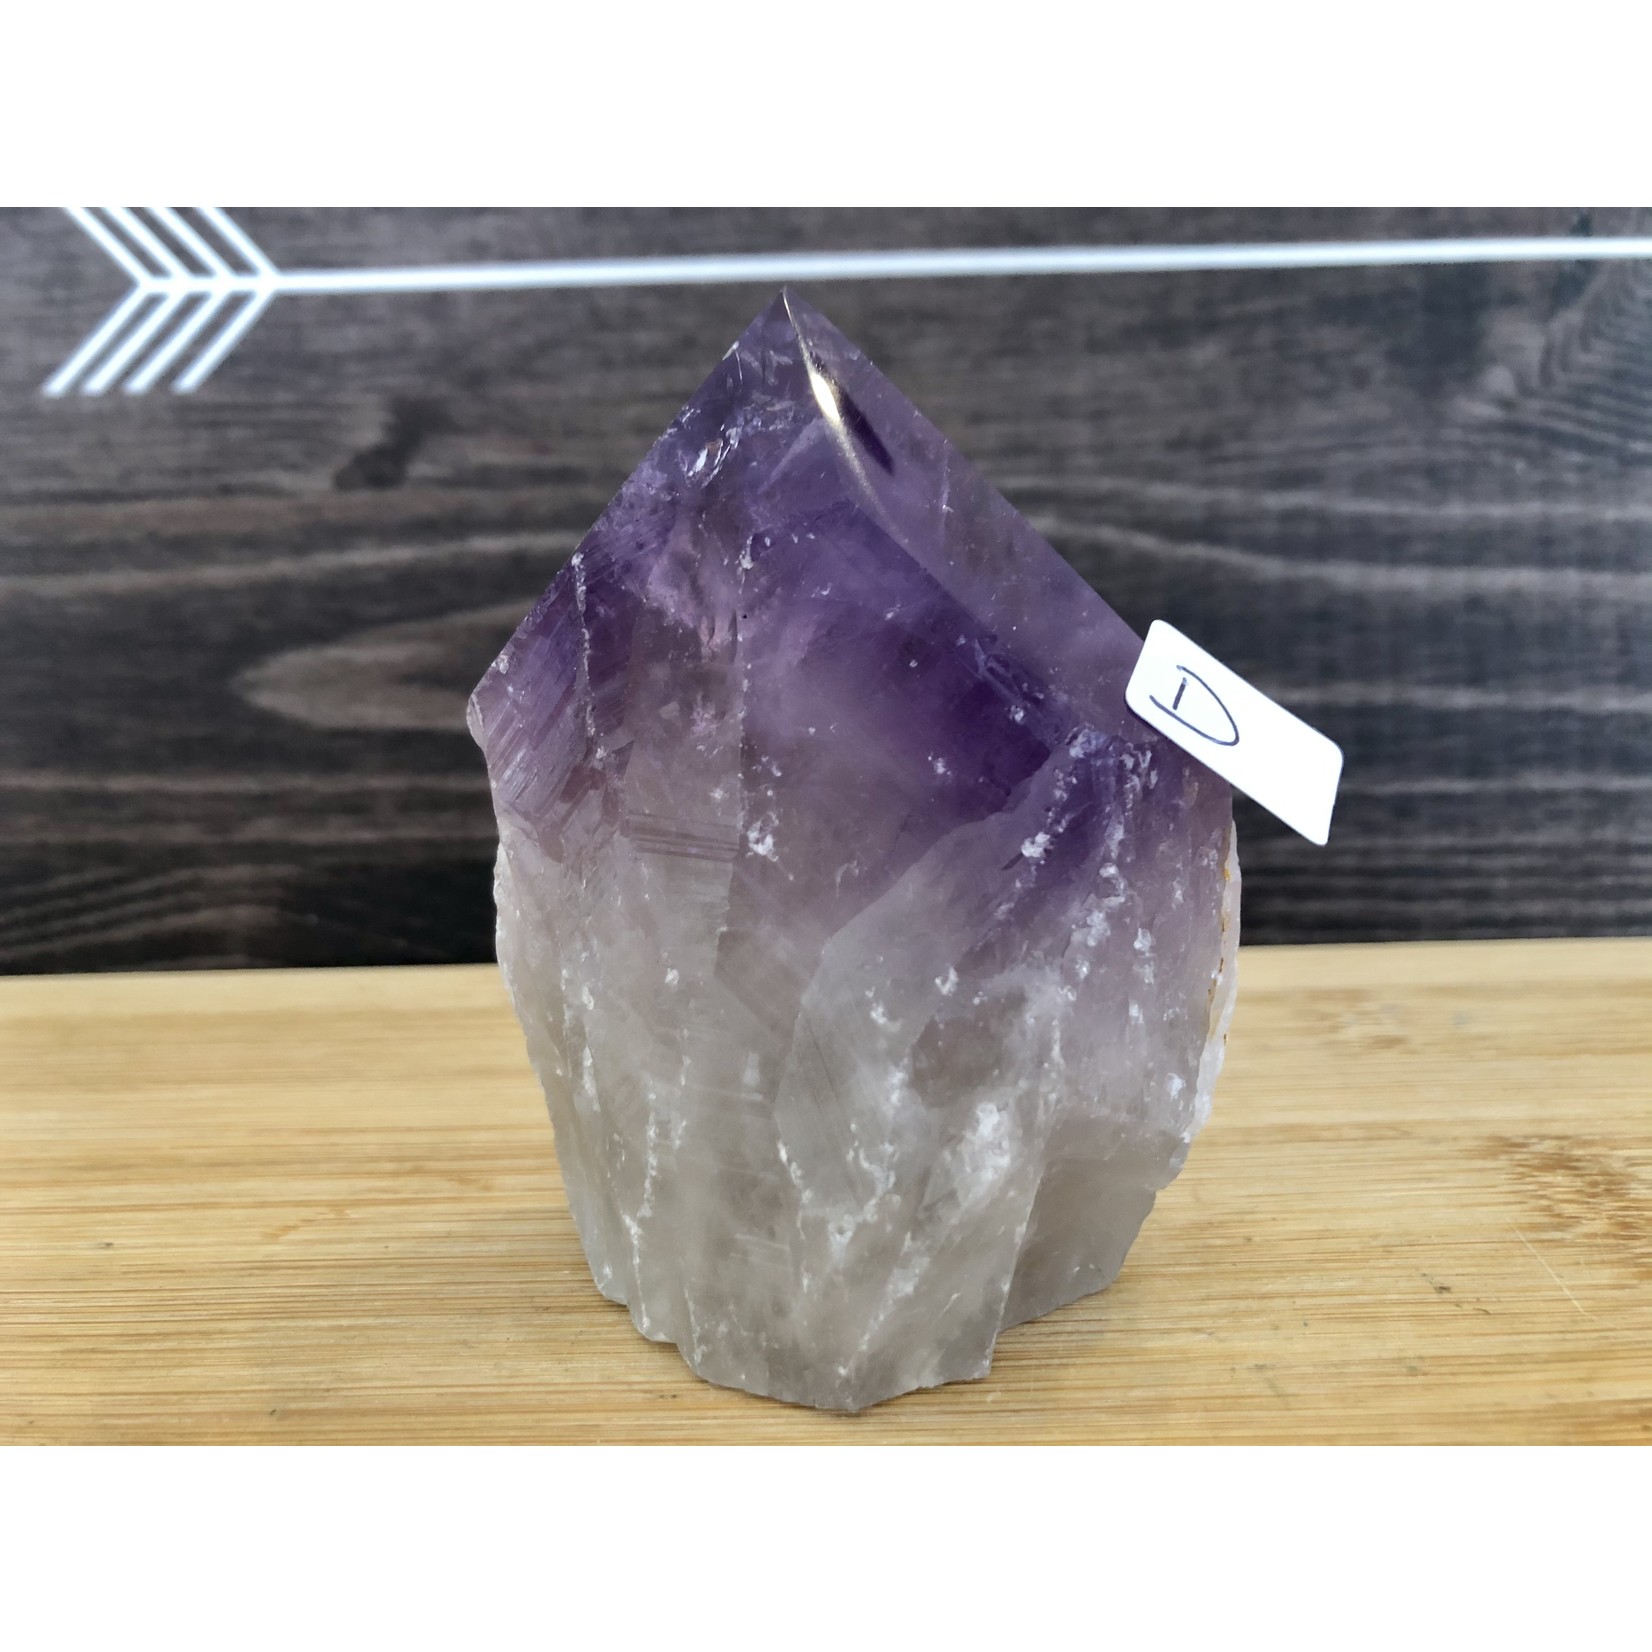 large amethyst top polished, large amethyst point, stone of wisdom and humility, promotes spiritual elevation, concentration and meditation